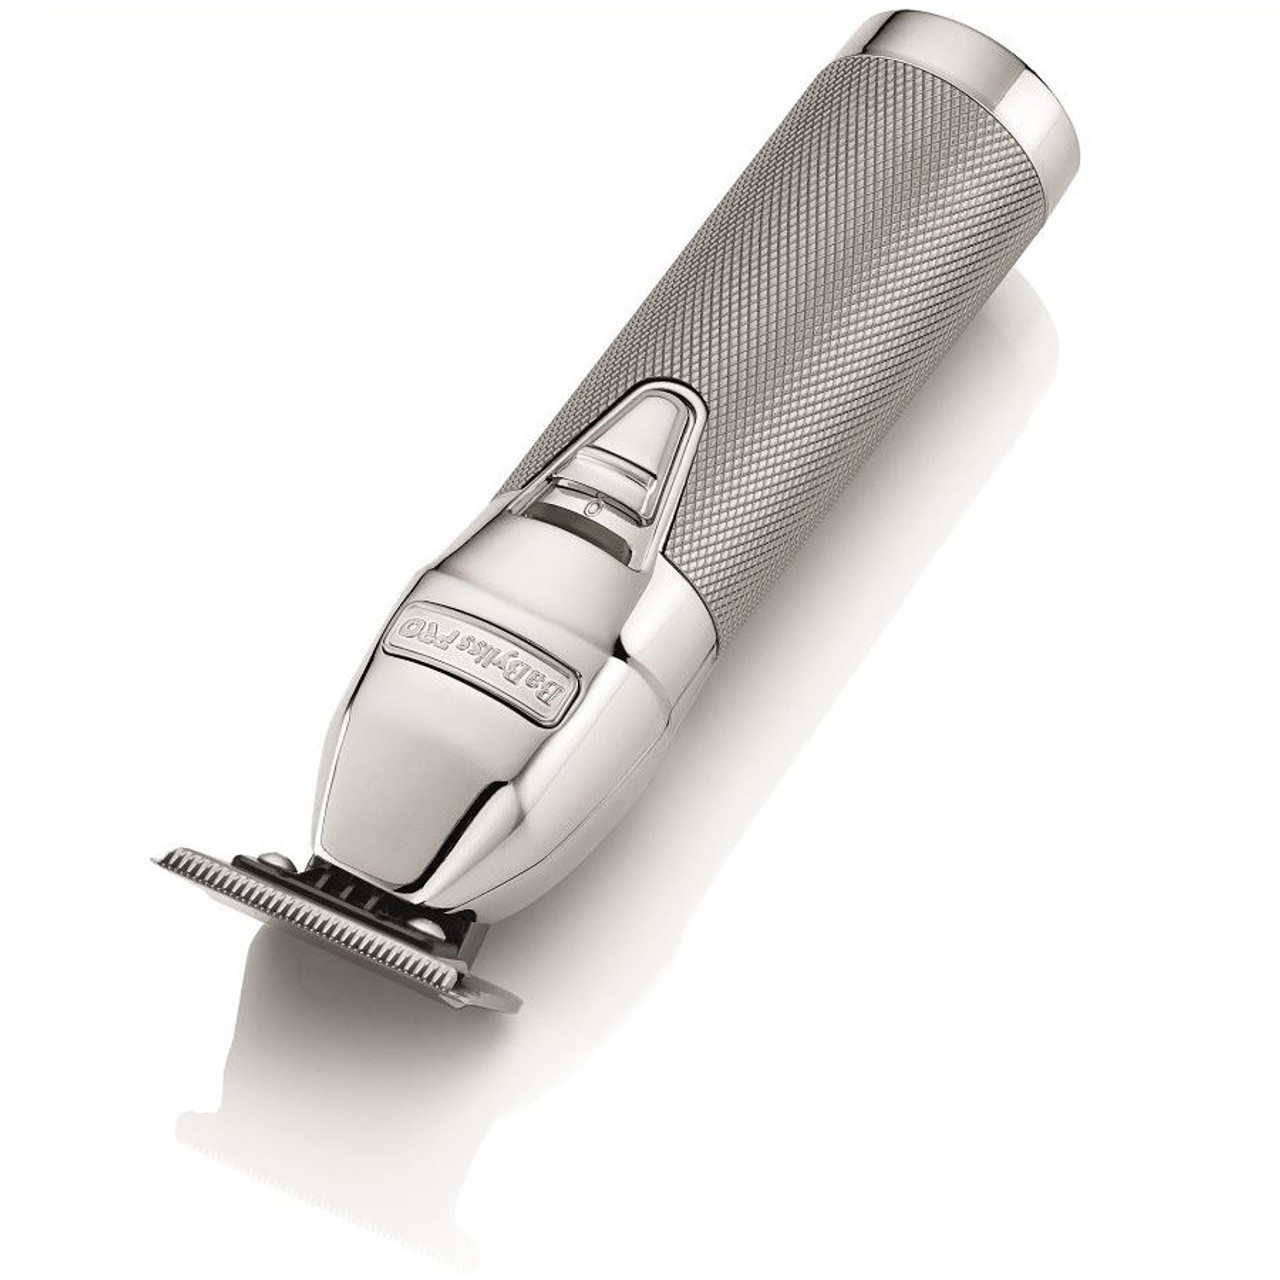 silver fx babyliss pro trimmer